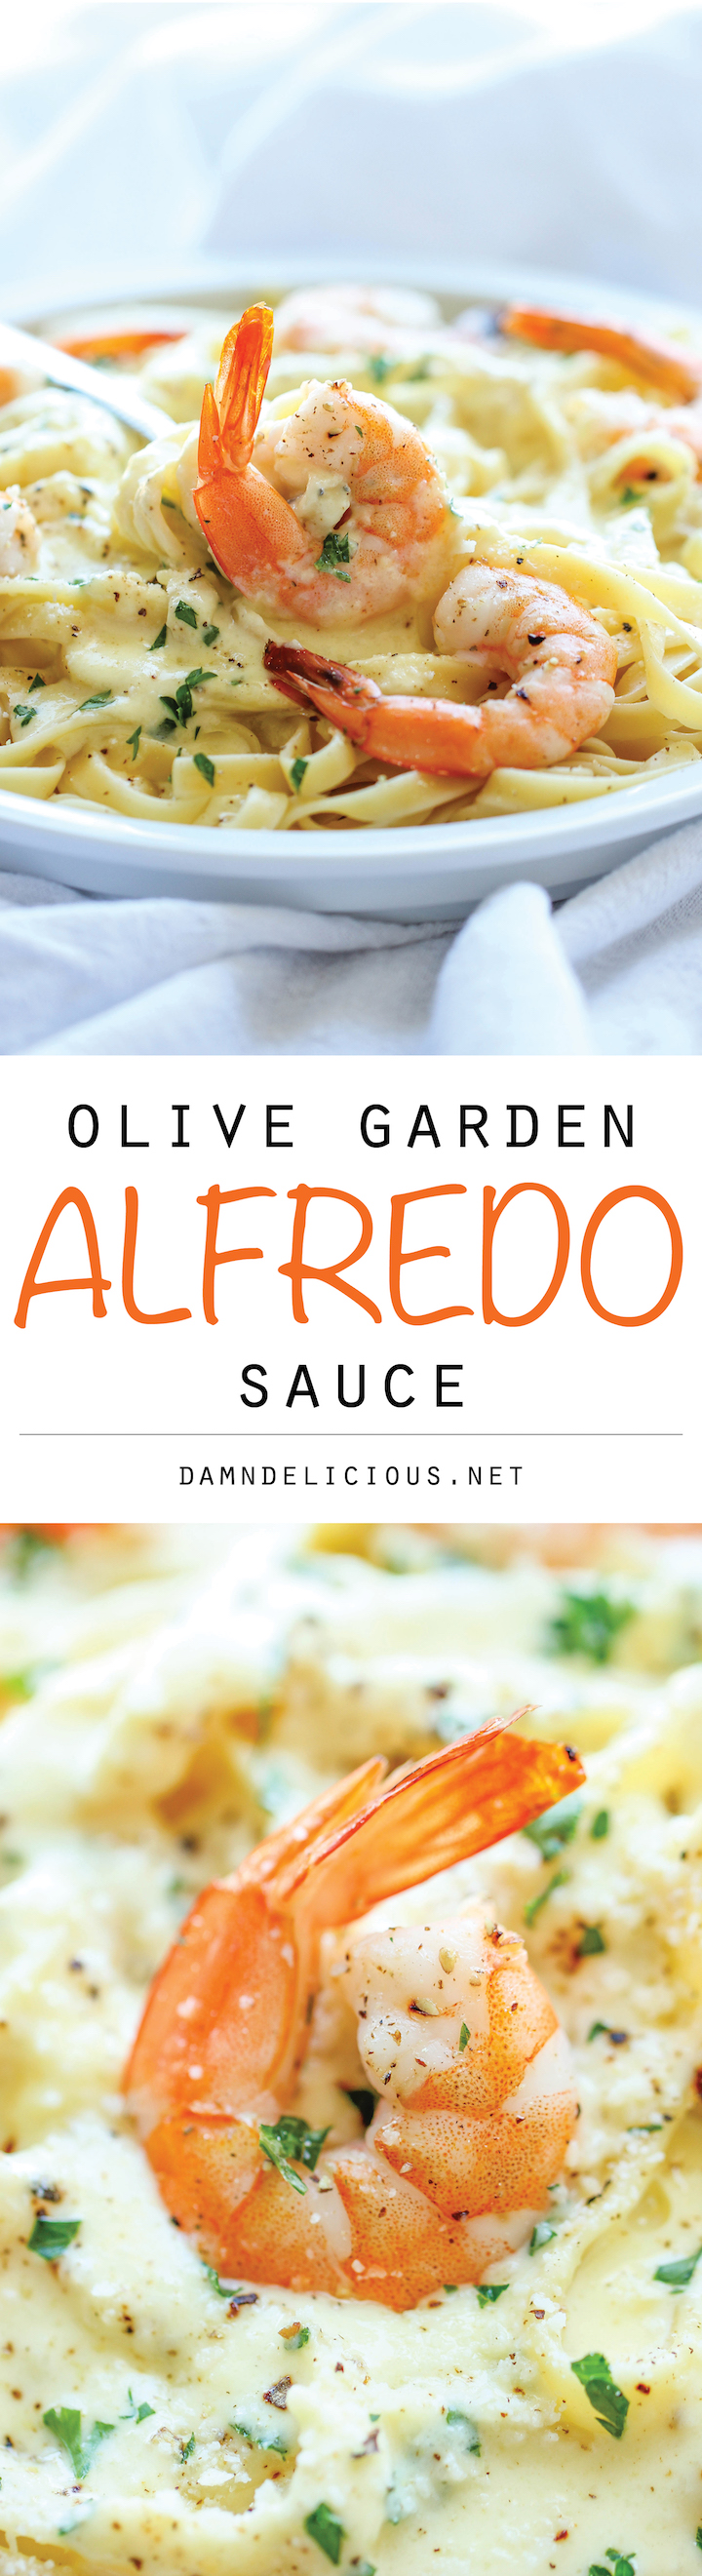 Olive Garden Alfredo Sauce - An easy, no-fuss dish you can make right at home. It’s also cheaper, healthier and quicker than ordering out!